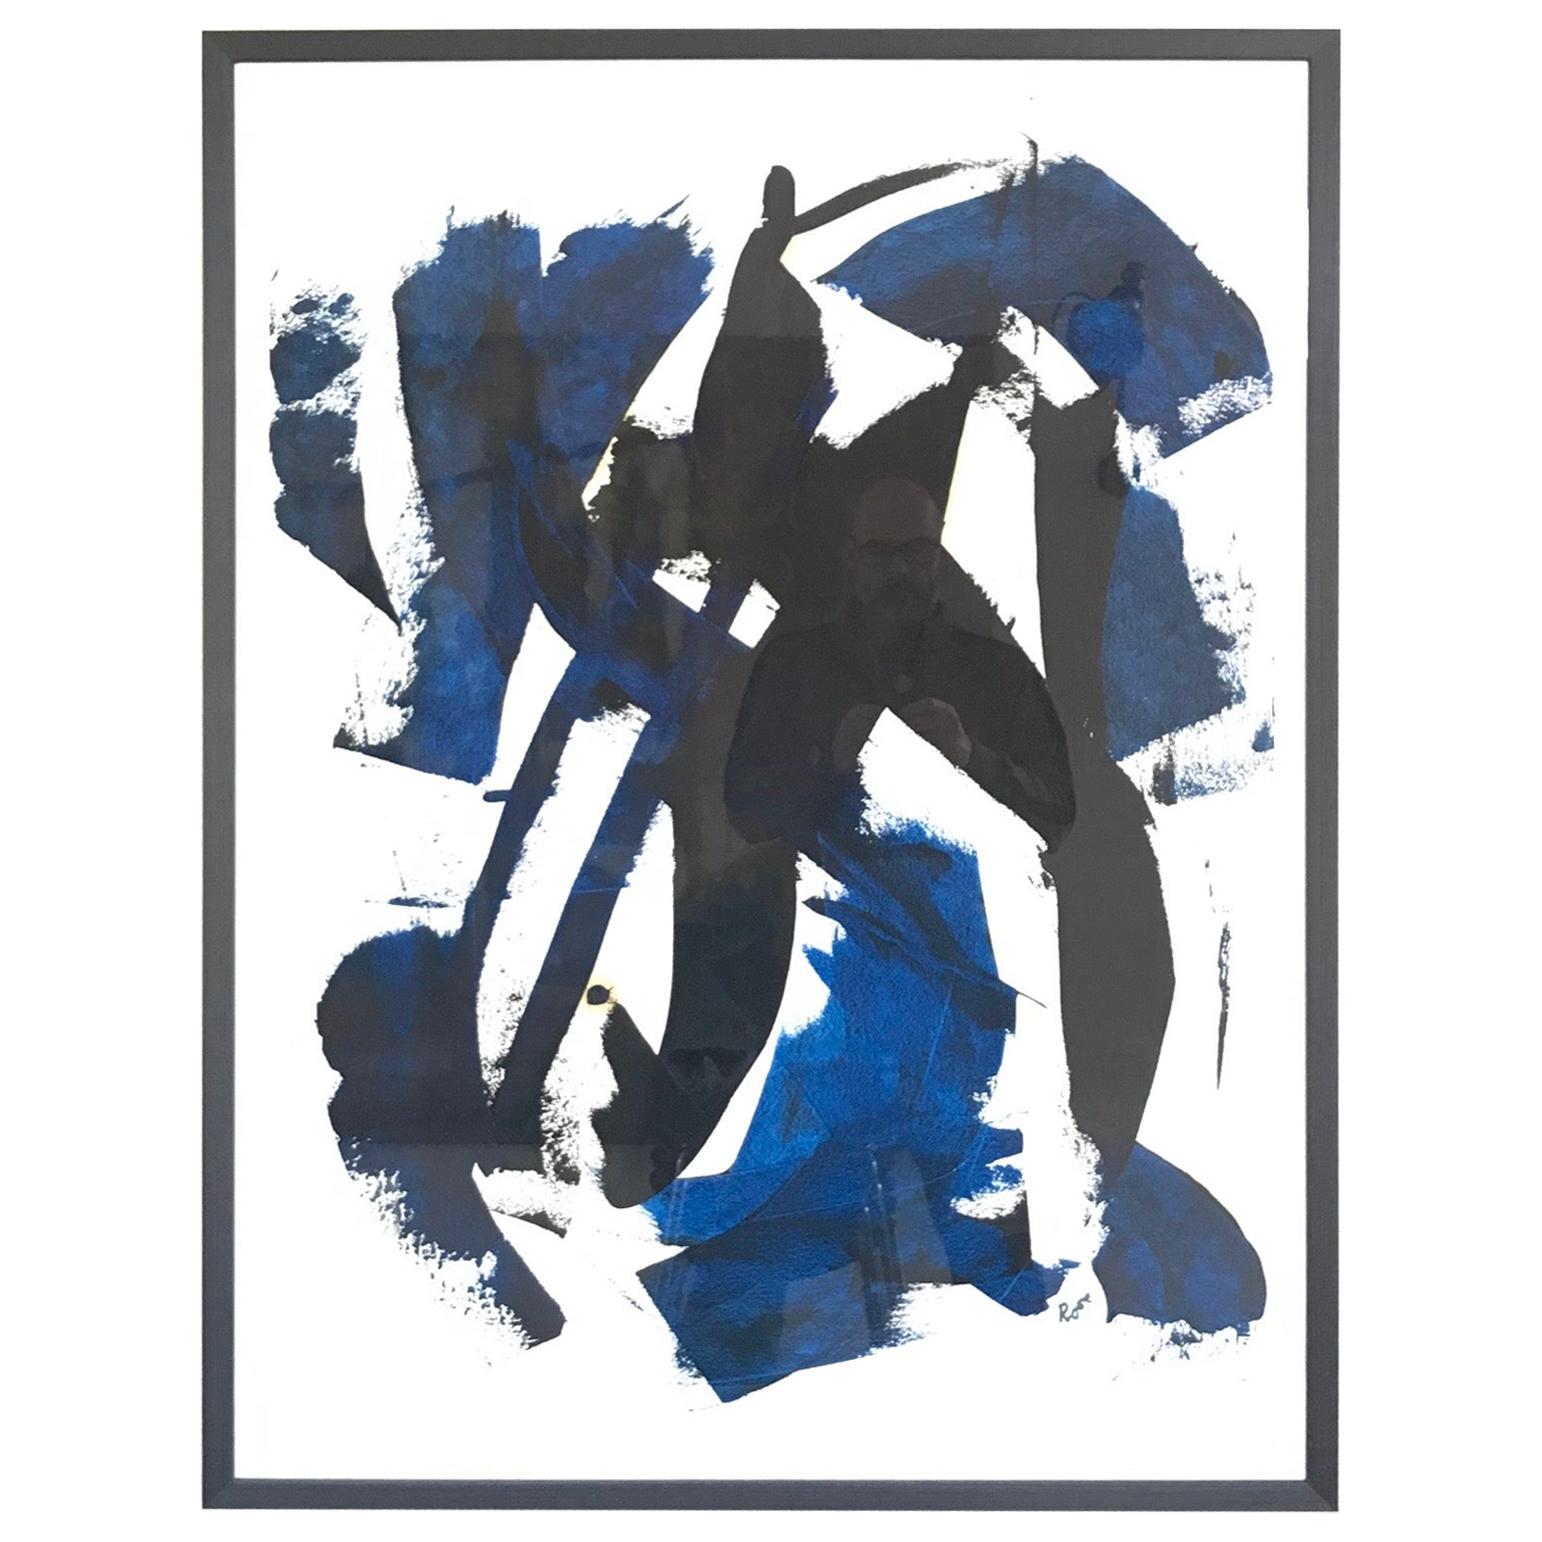 Oil on Paper “Black Gives Way for Blue” by Jan Rose